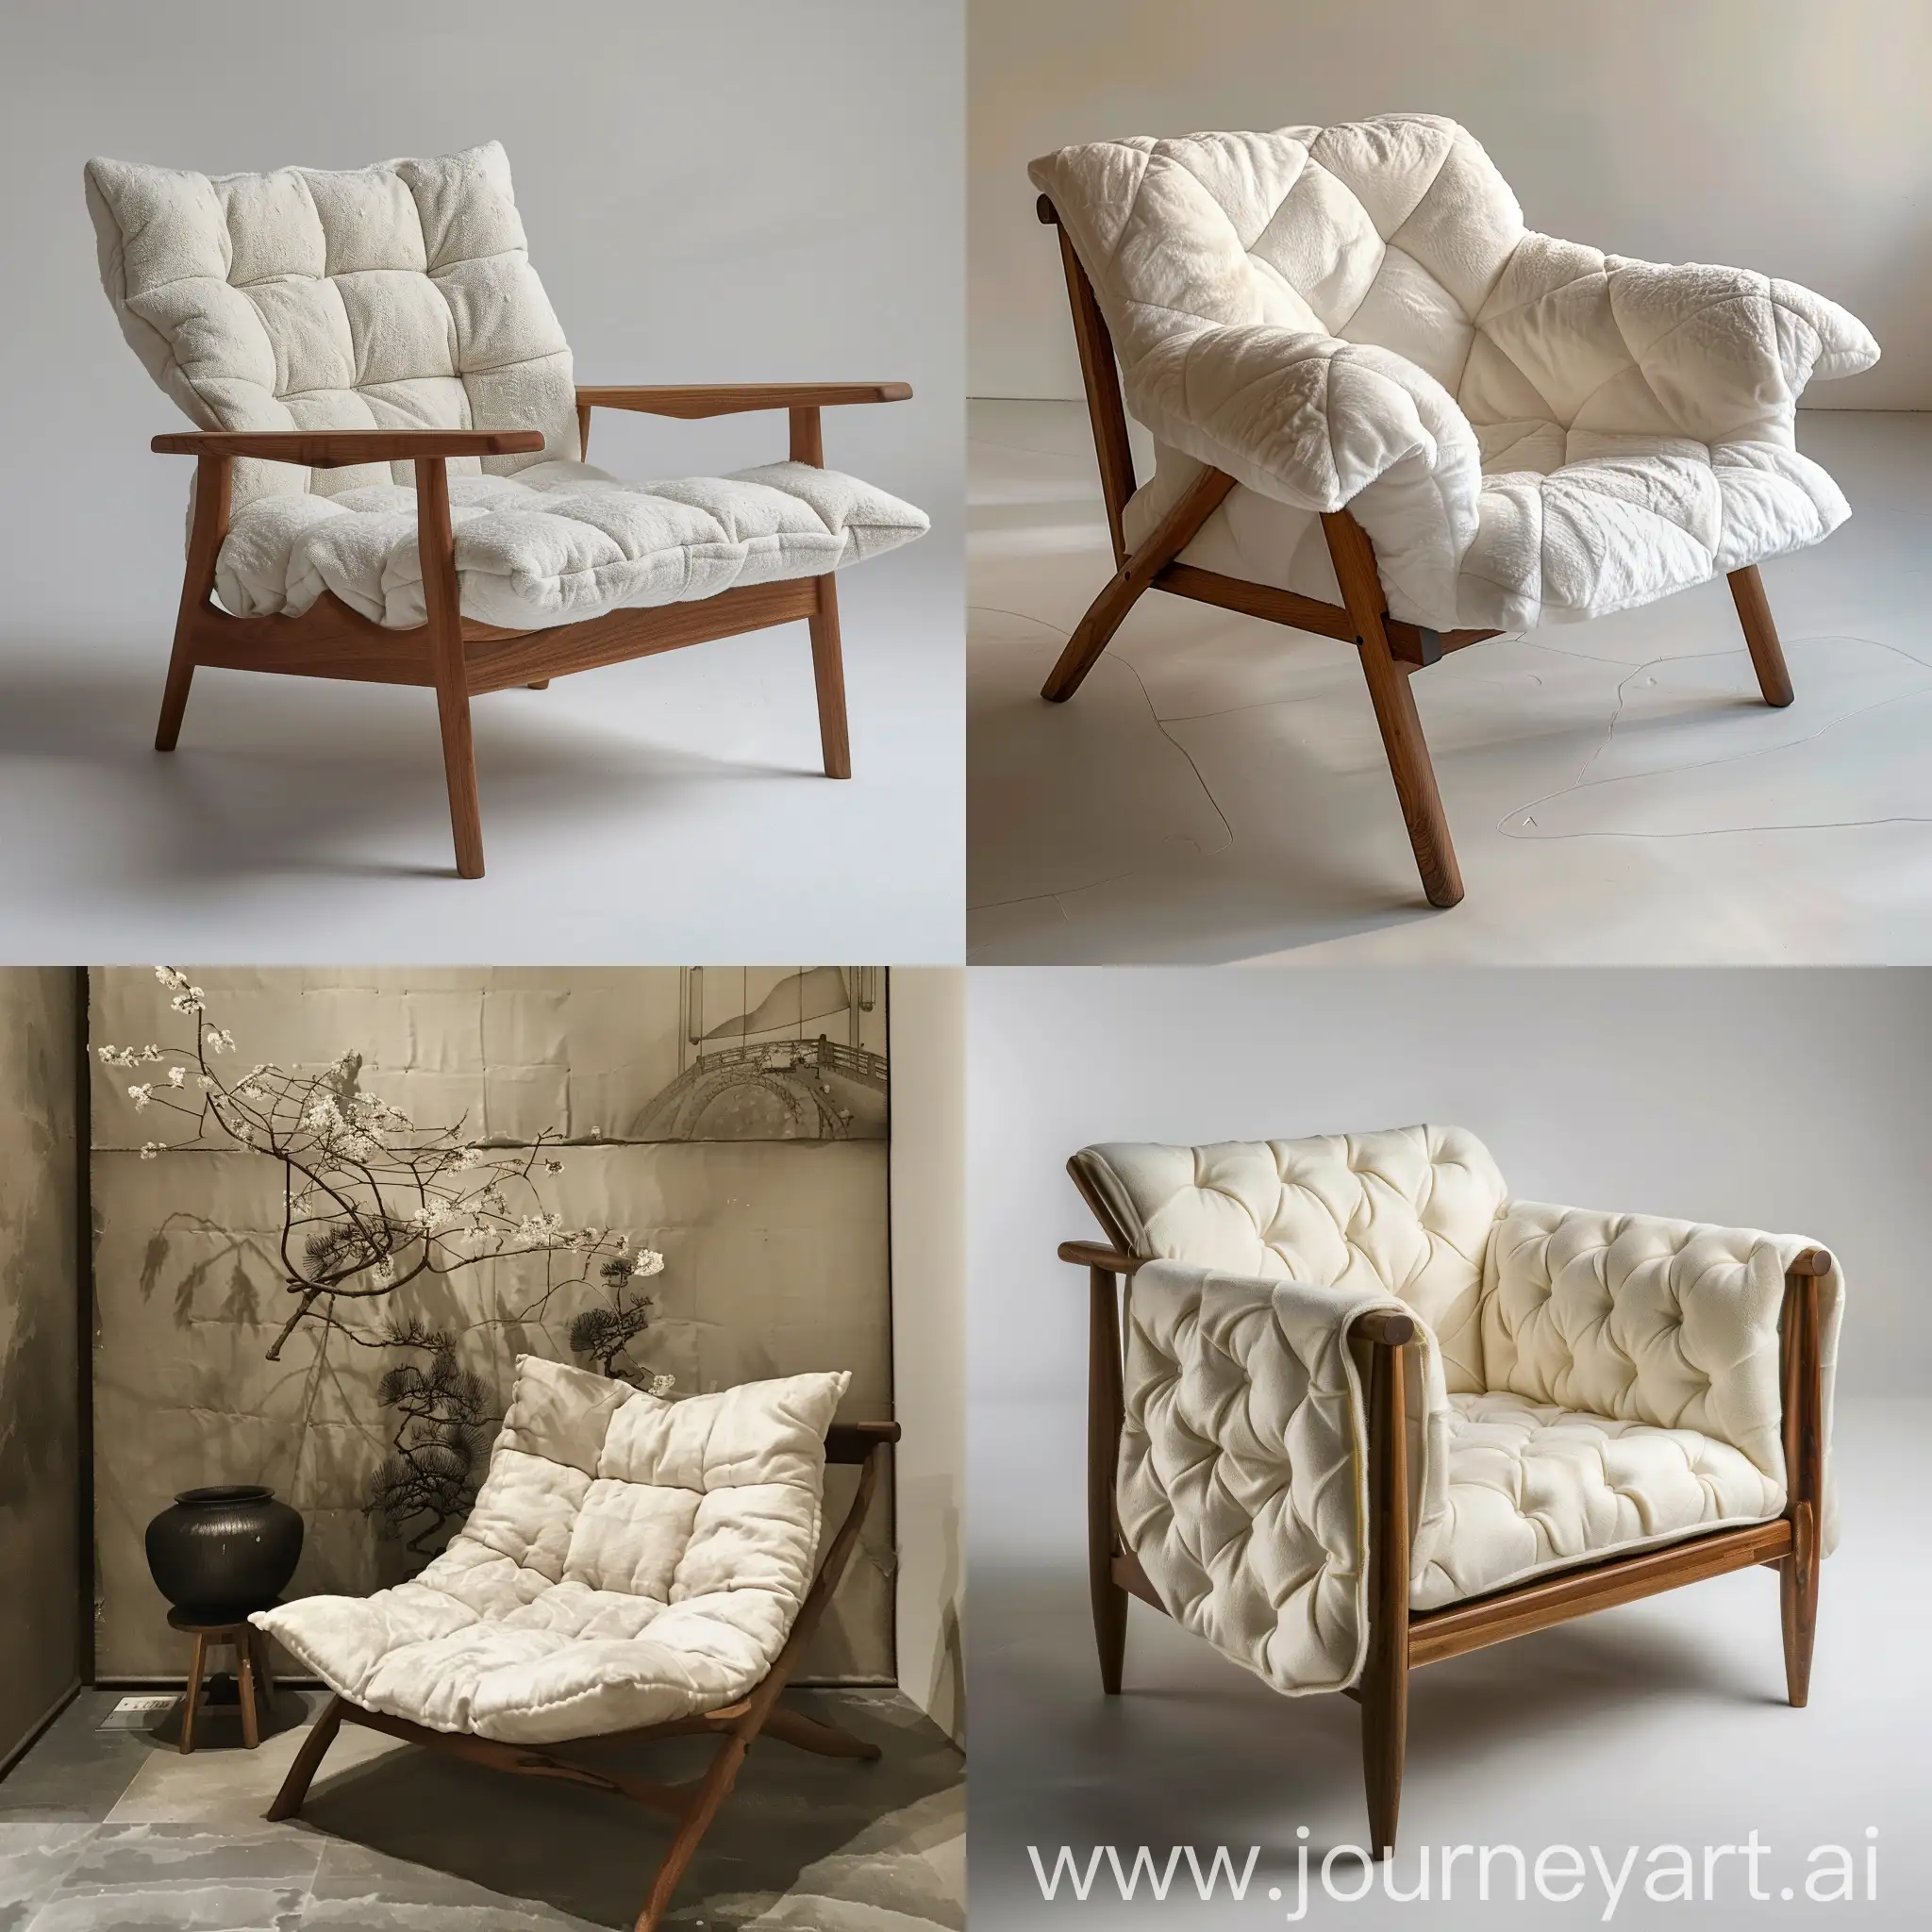 Luxurious-Japanese-Chair-with-Cashmere-Quilt-Trendy-and-Unique-Design